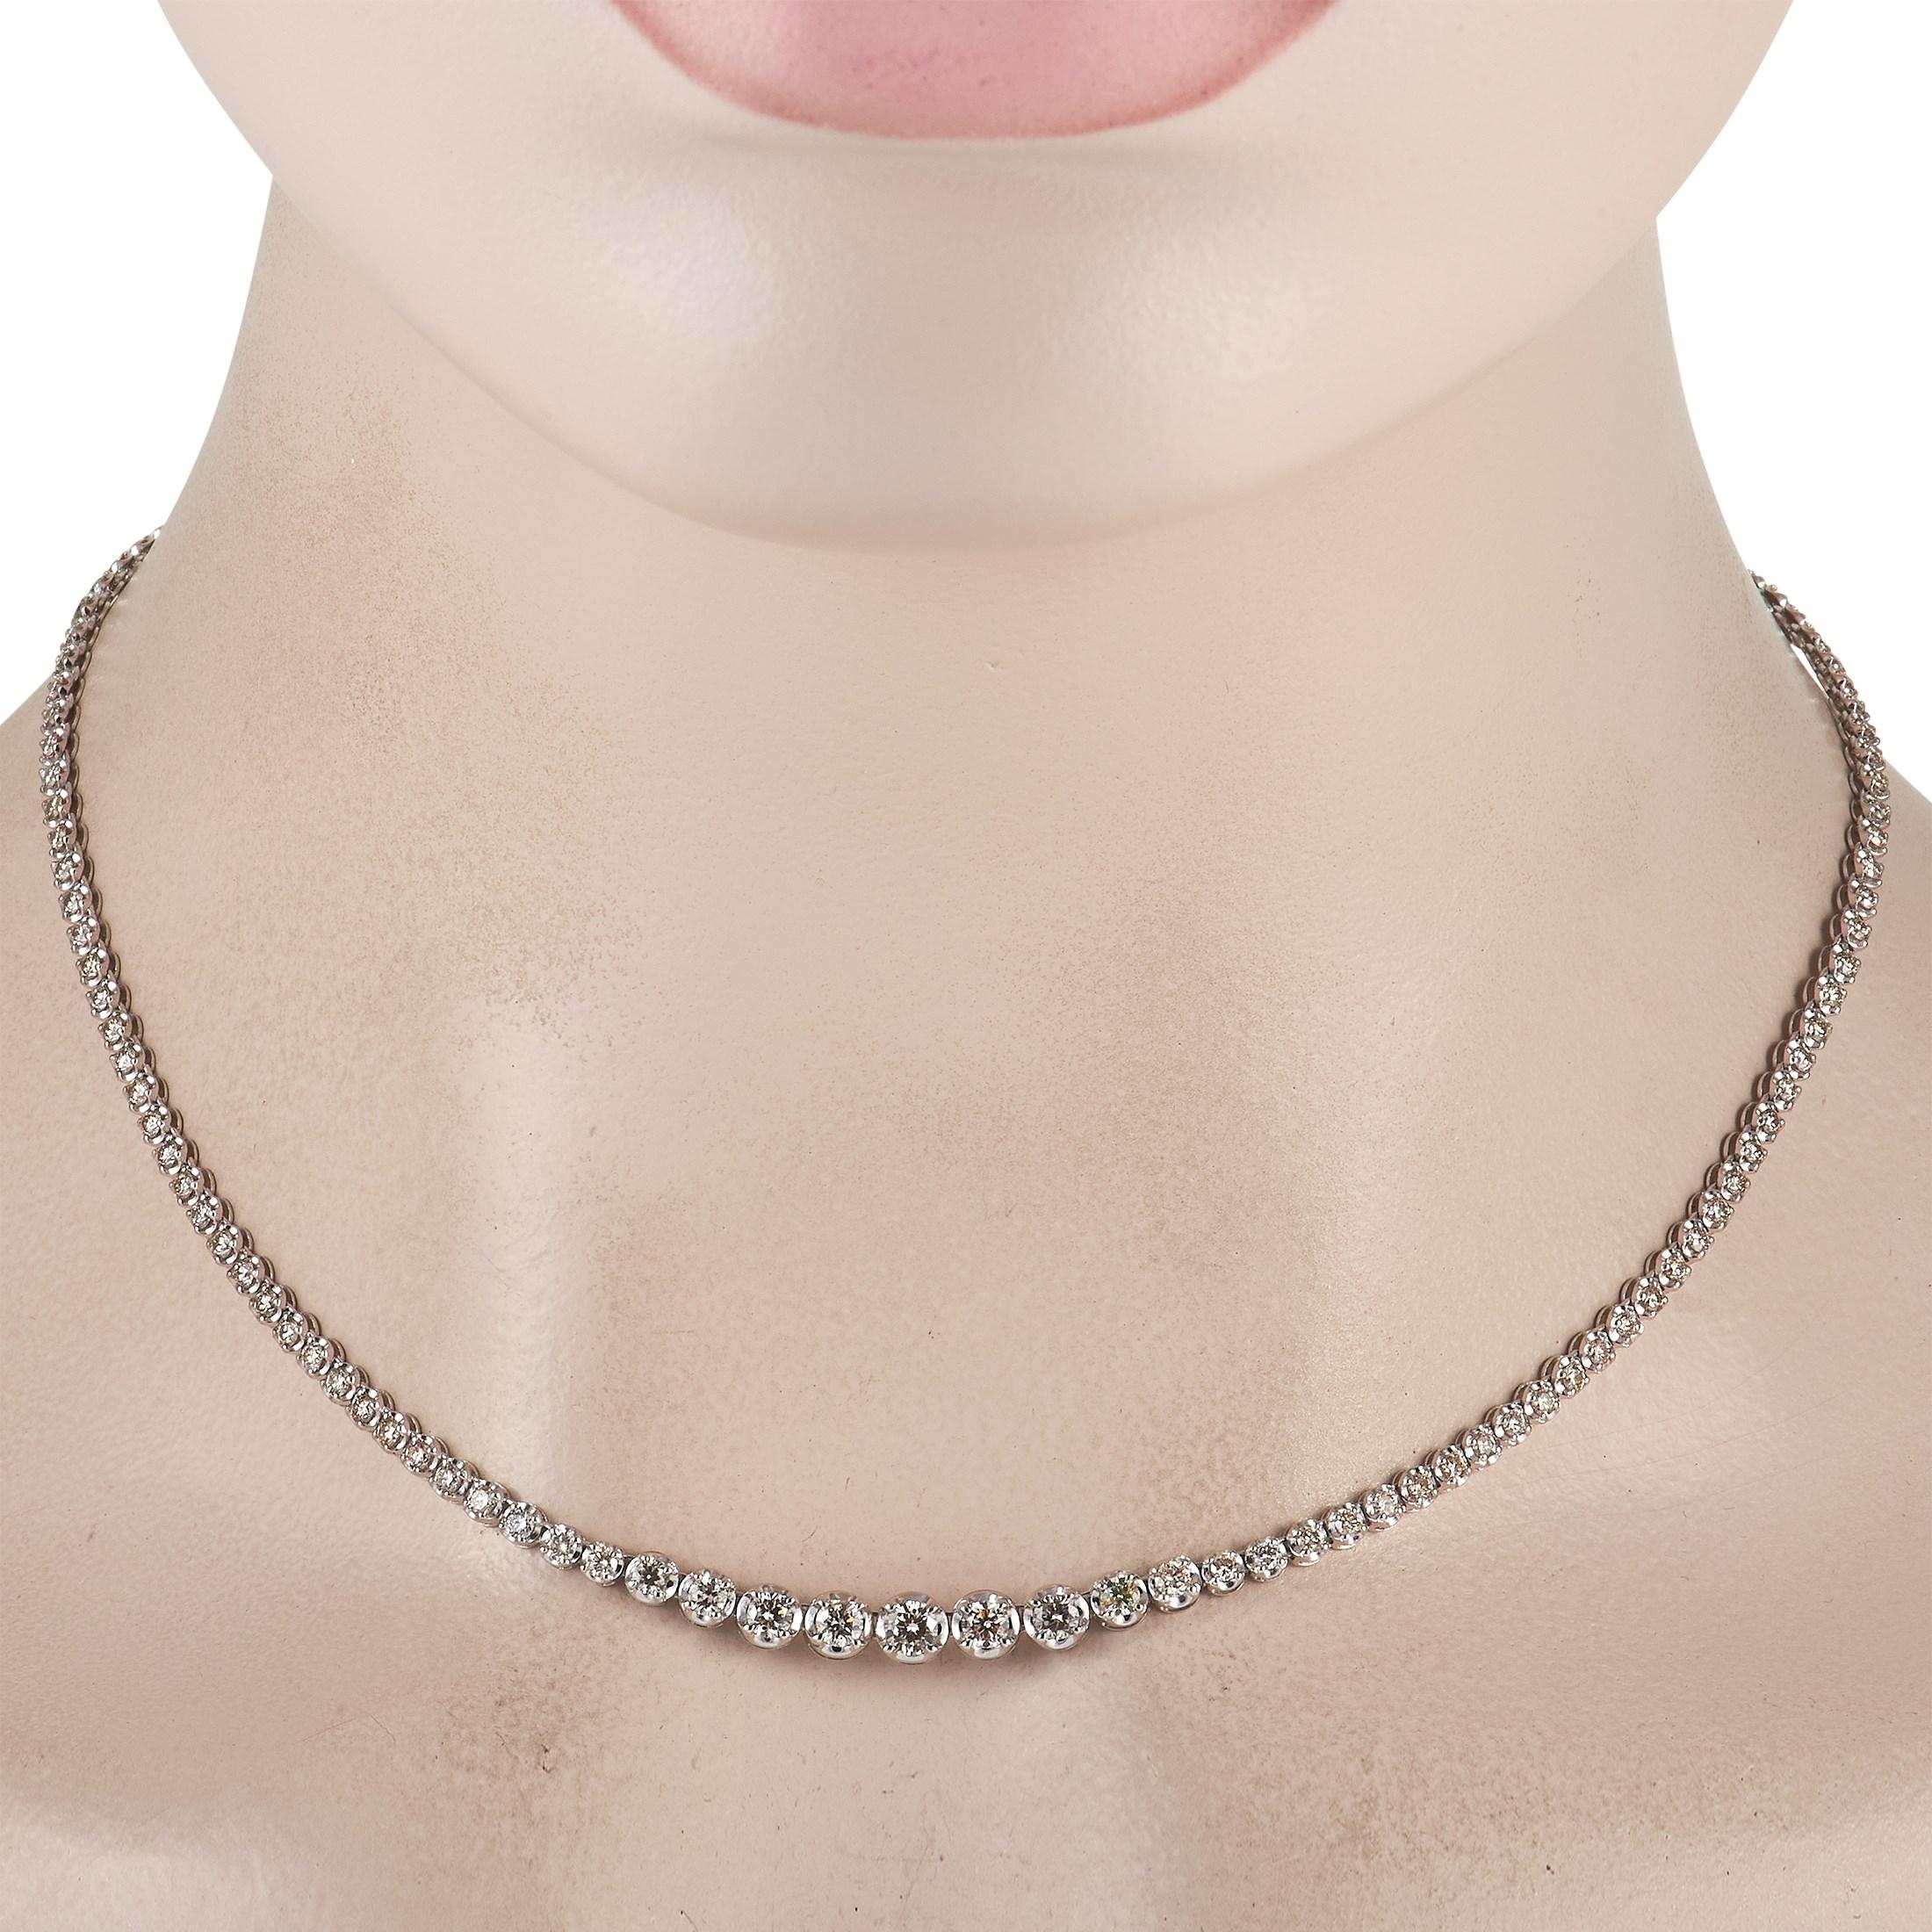 So subtle yet still capable of packing a punch, this tennis necklace with diamonds graduating in size at the center will easily become your new go-to diamond jewelry. It is expertly crafted in 18K white gold and adorned with a continuous row of